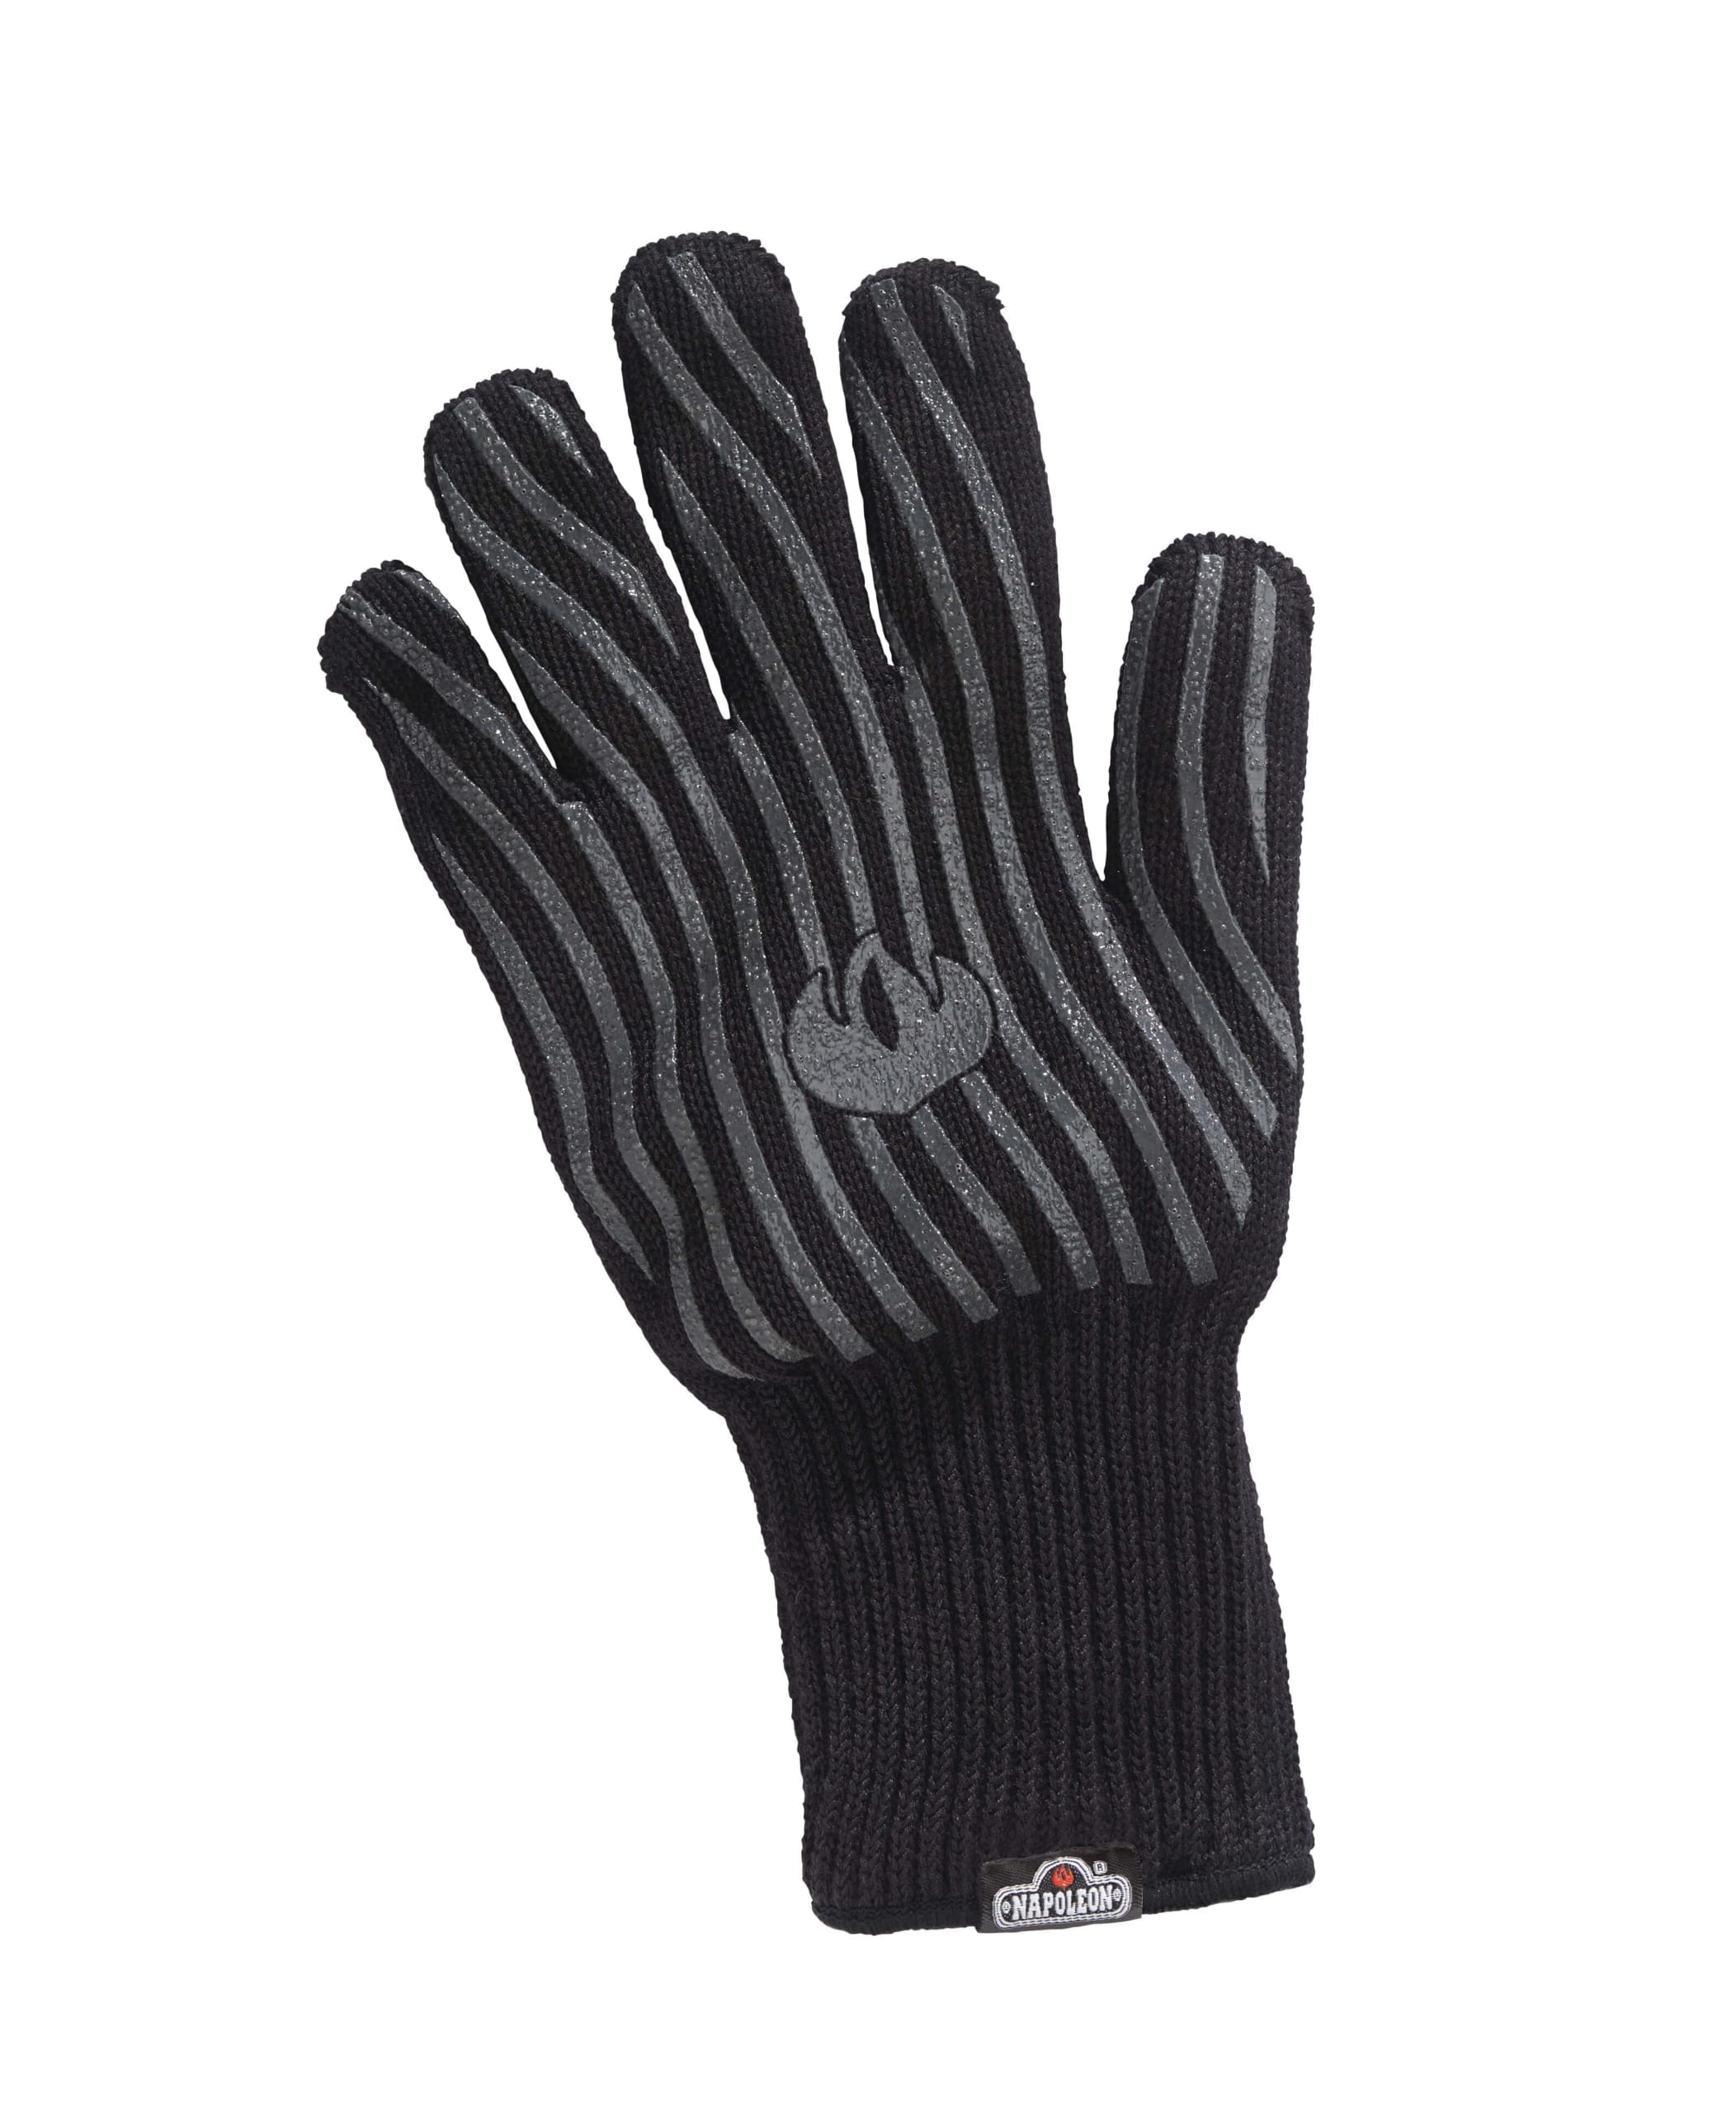 https://northernfireplace.com/wp-content/uploads/2021/02/62145_Grilling-Gloves-on-white-Full-Size-scaled.jpg